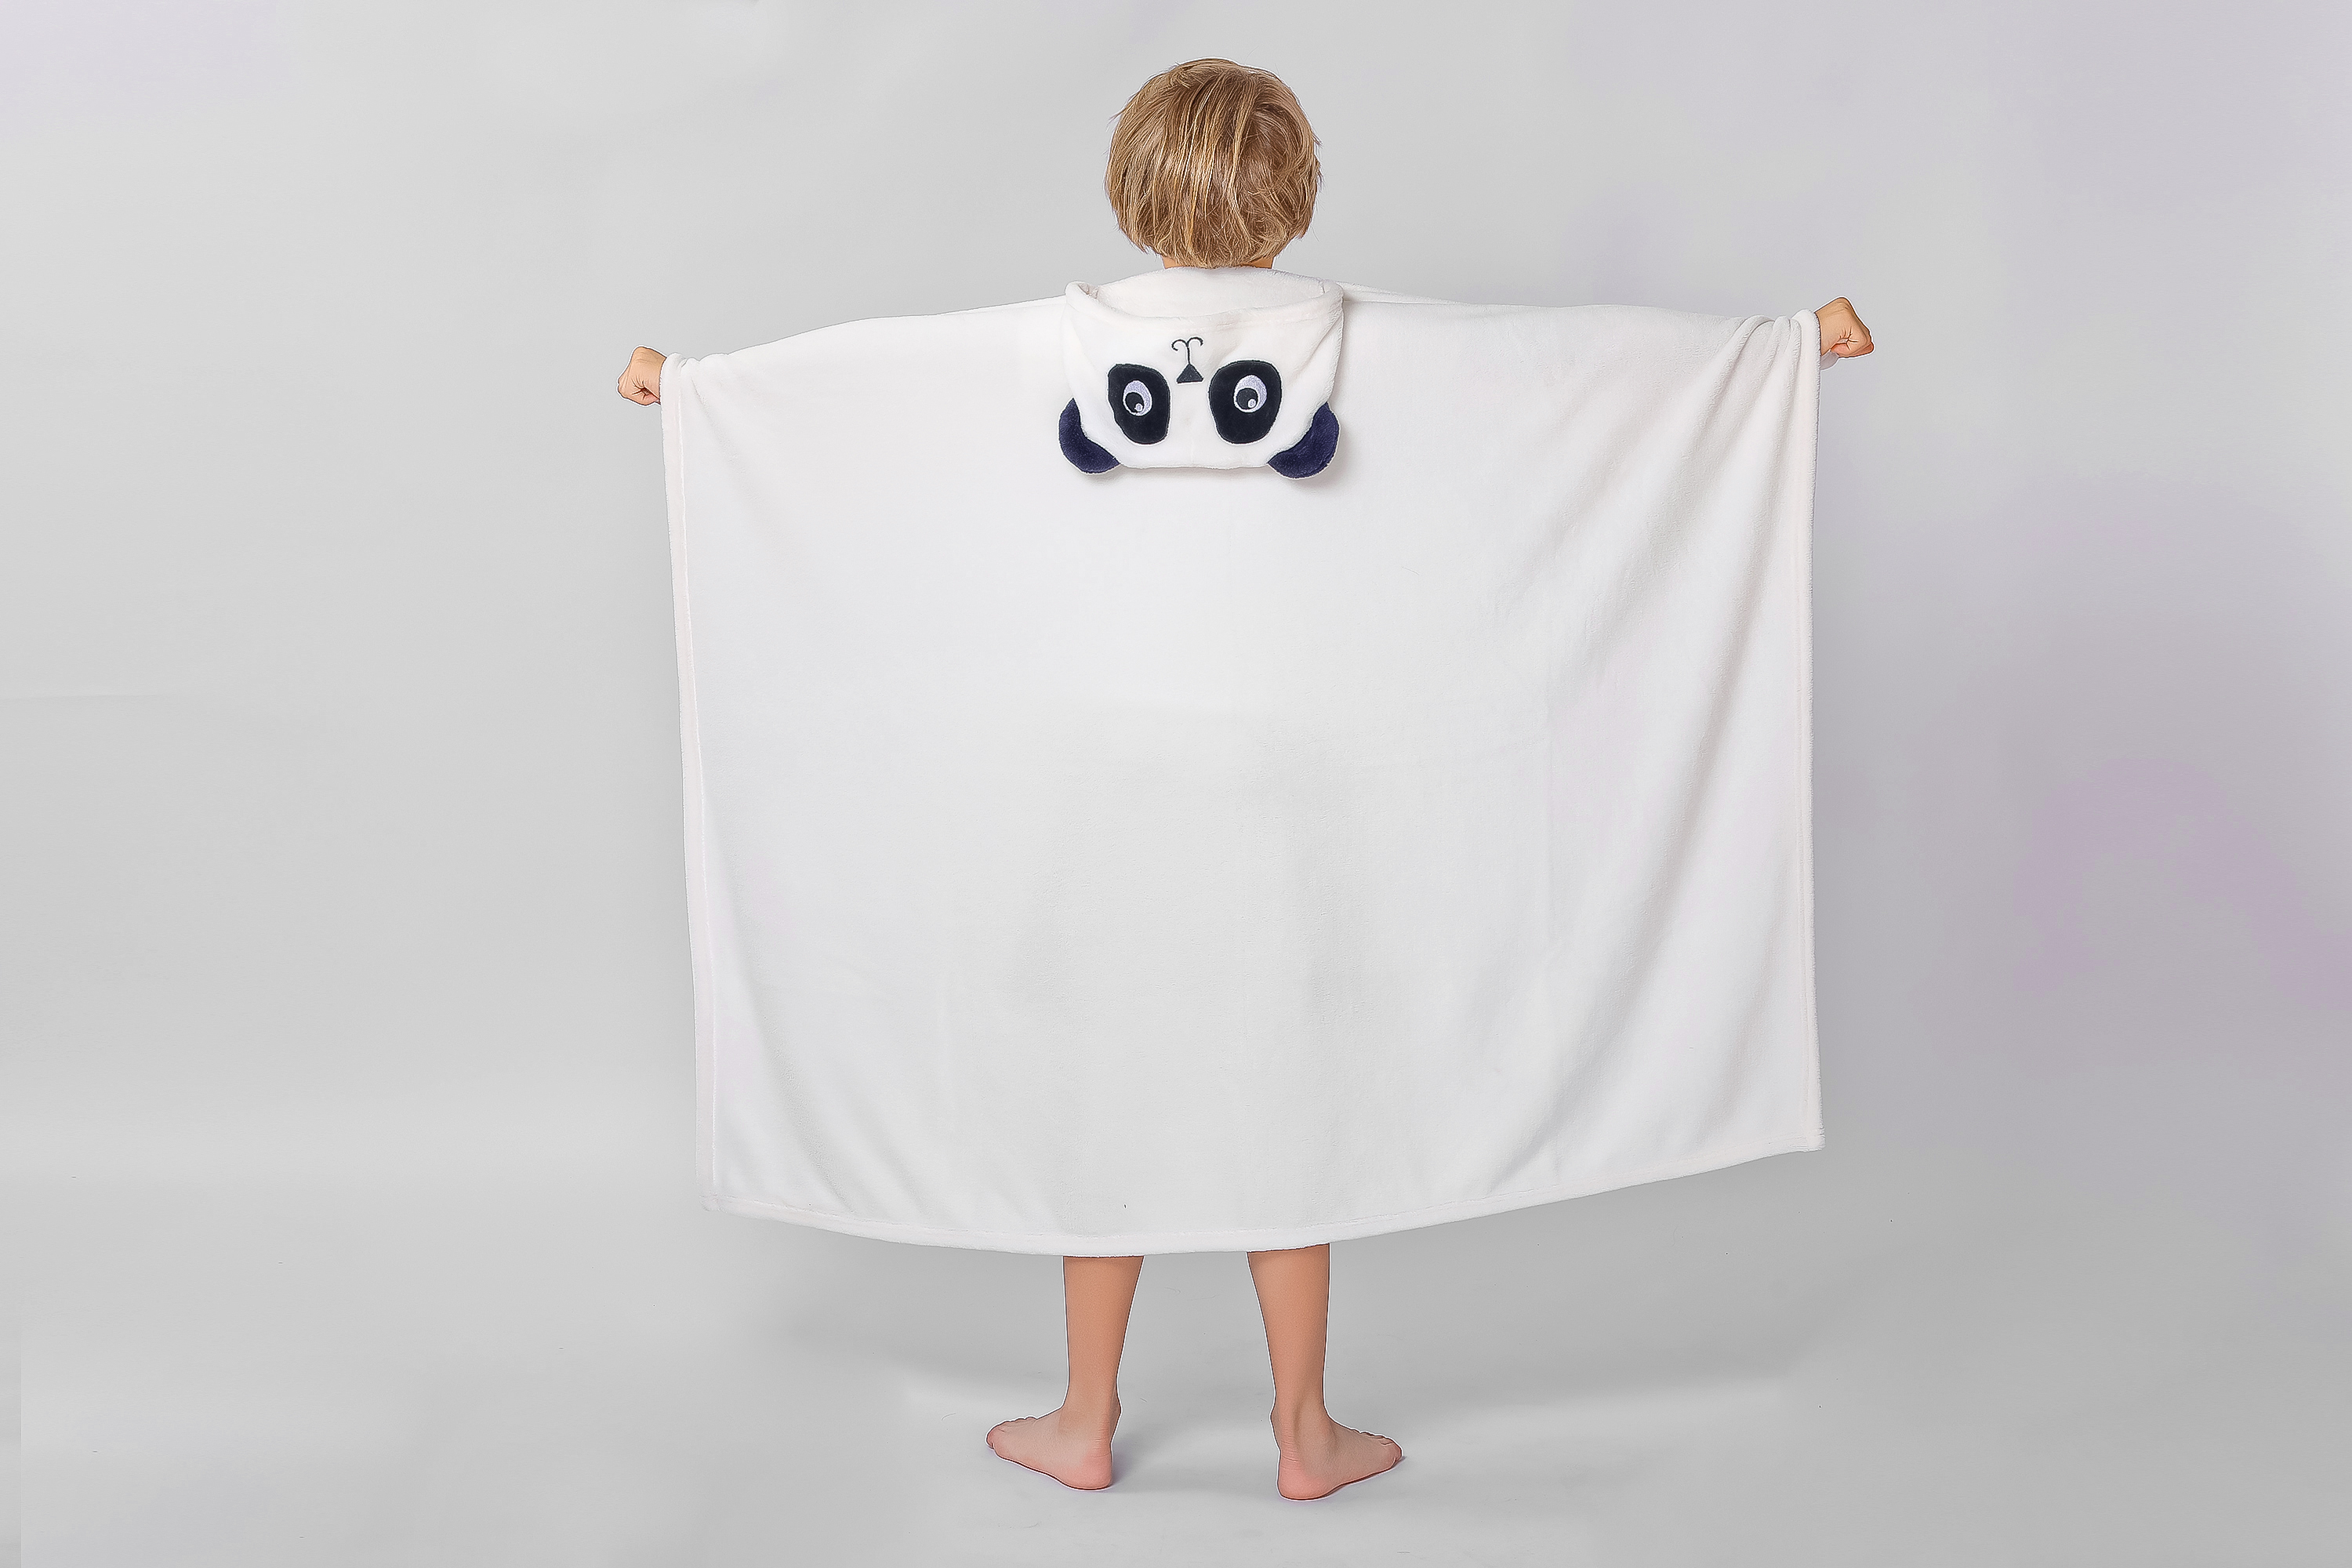 Panda Hooded Throw for Kids by Down Home - image 4 of 4